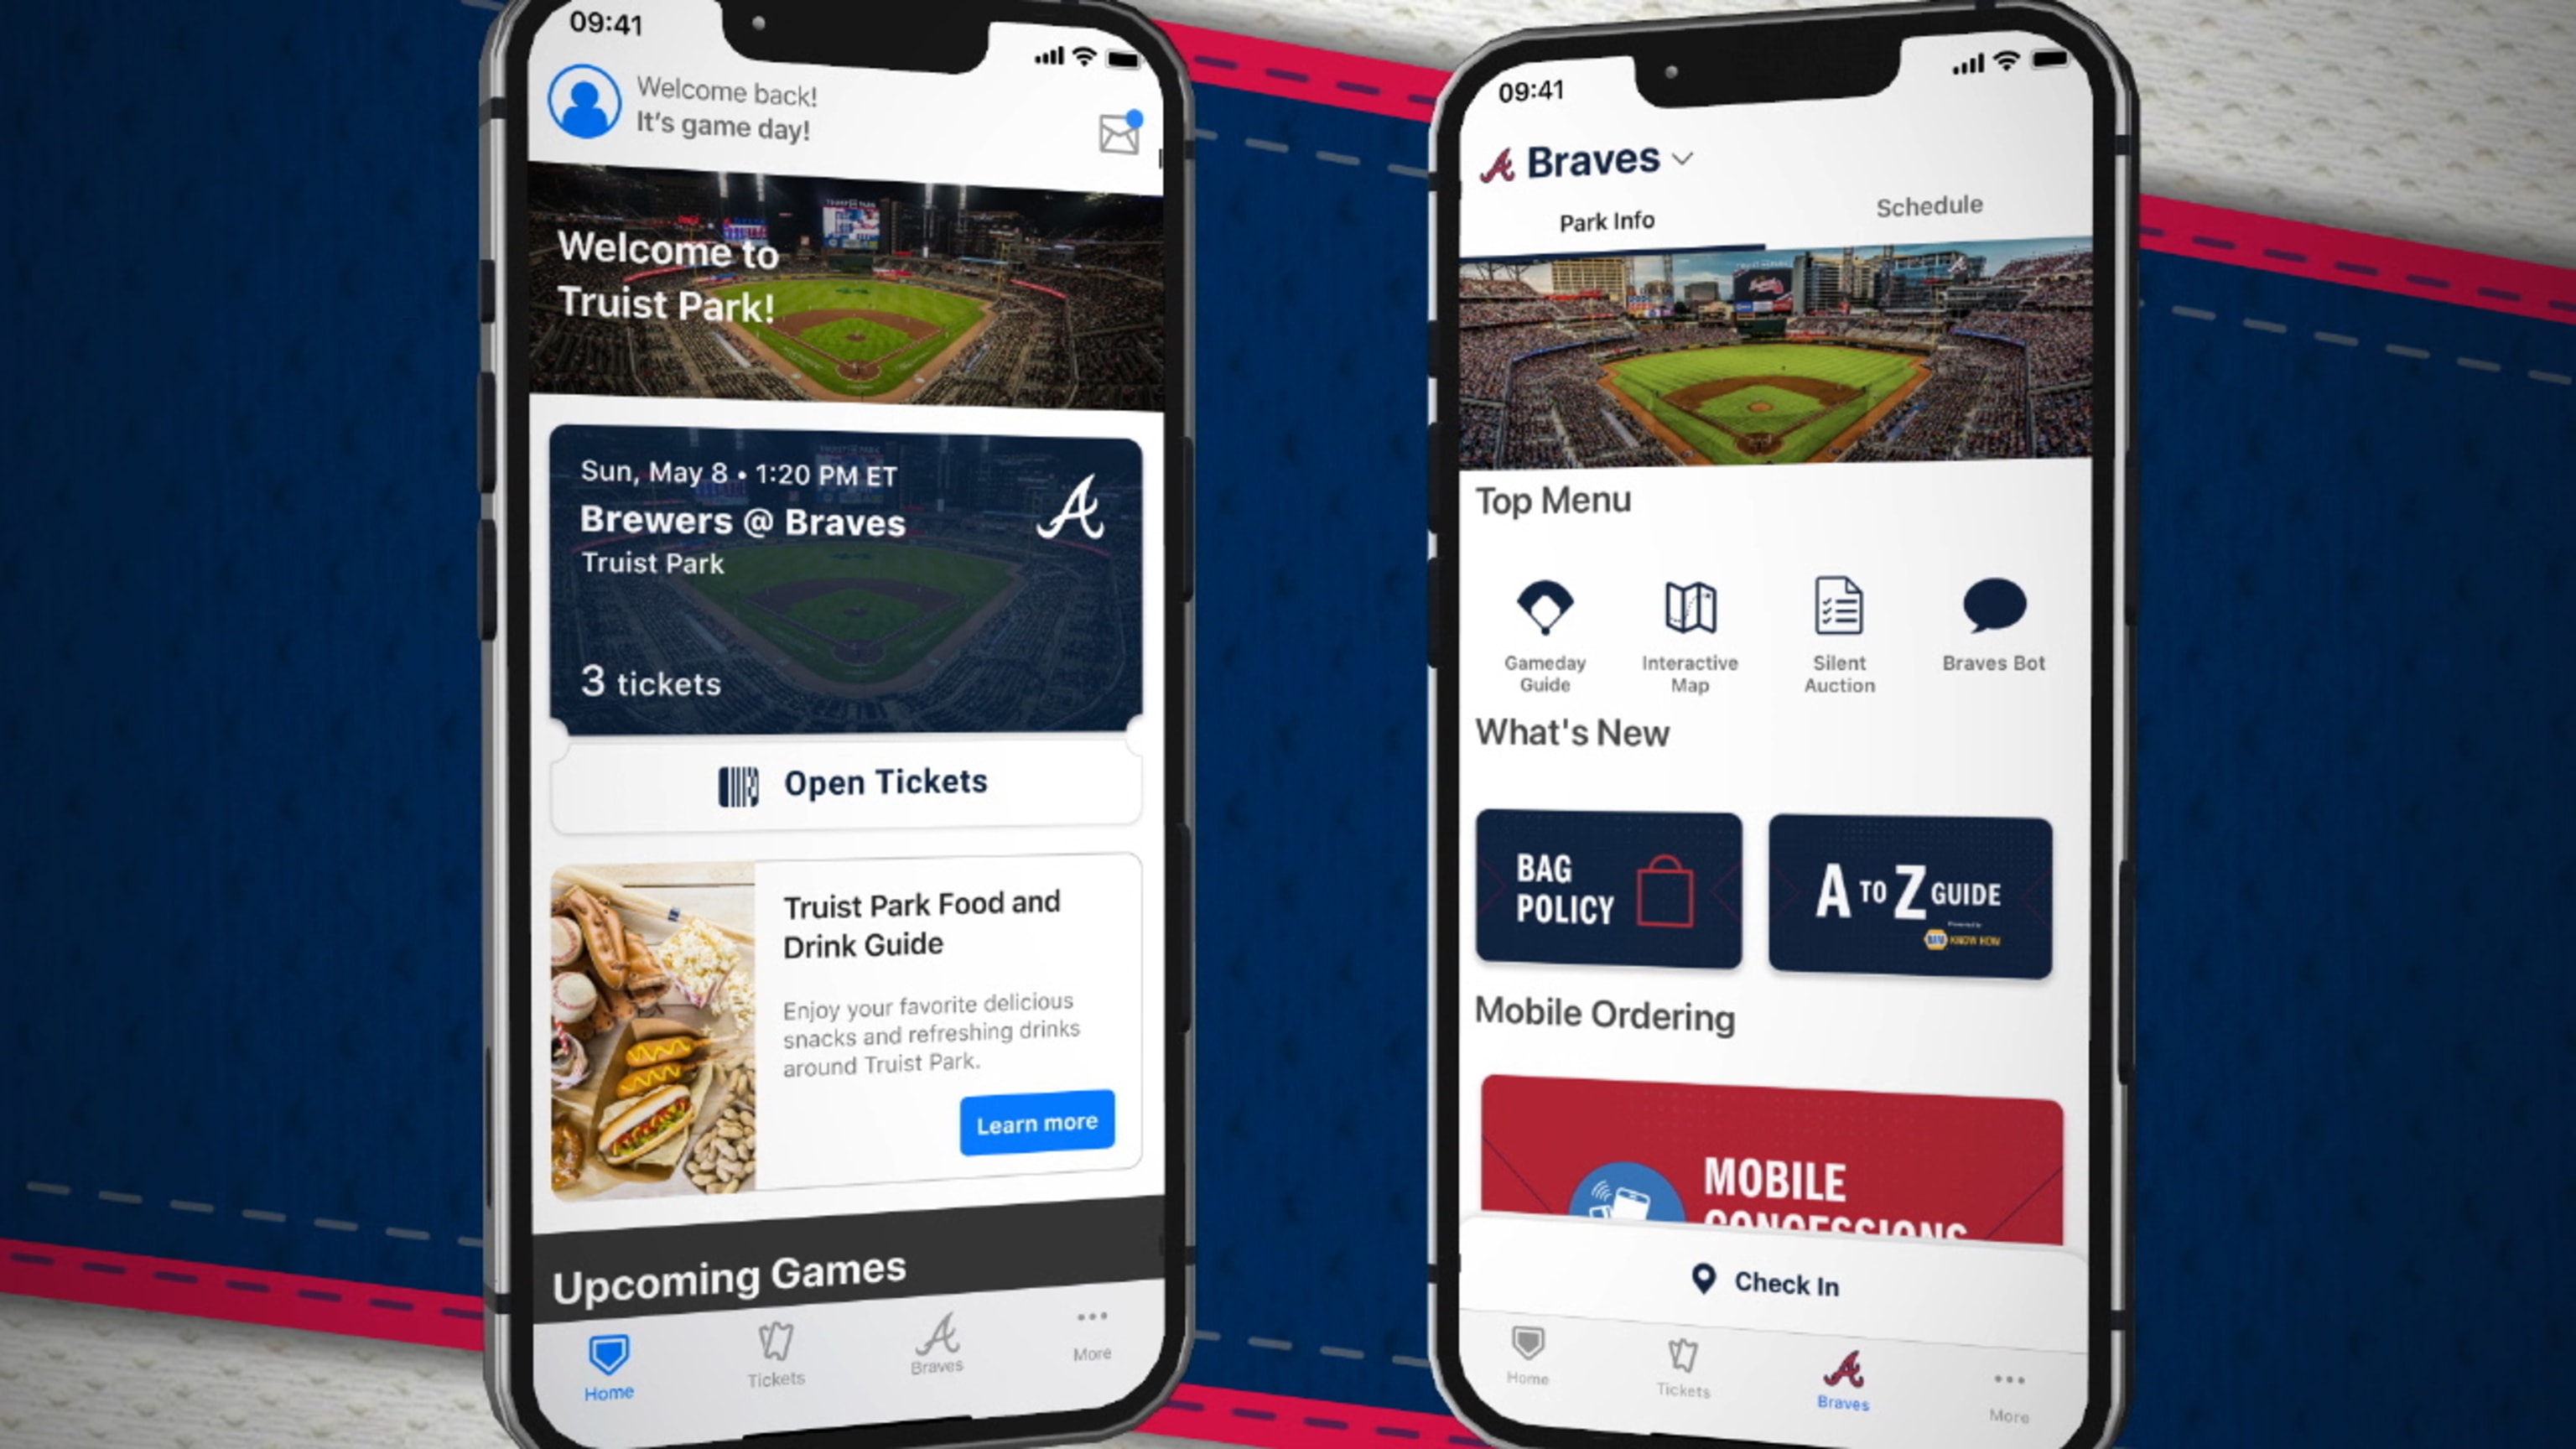 How to Get Club Tickets for the Atlanta Braves - SeatGeek - TBA